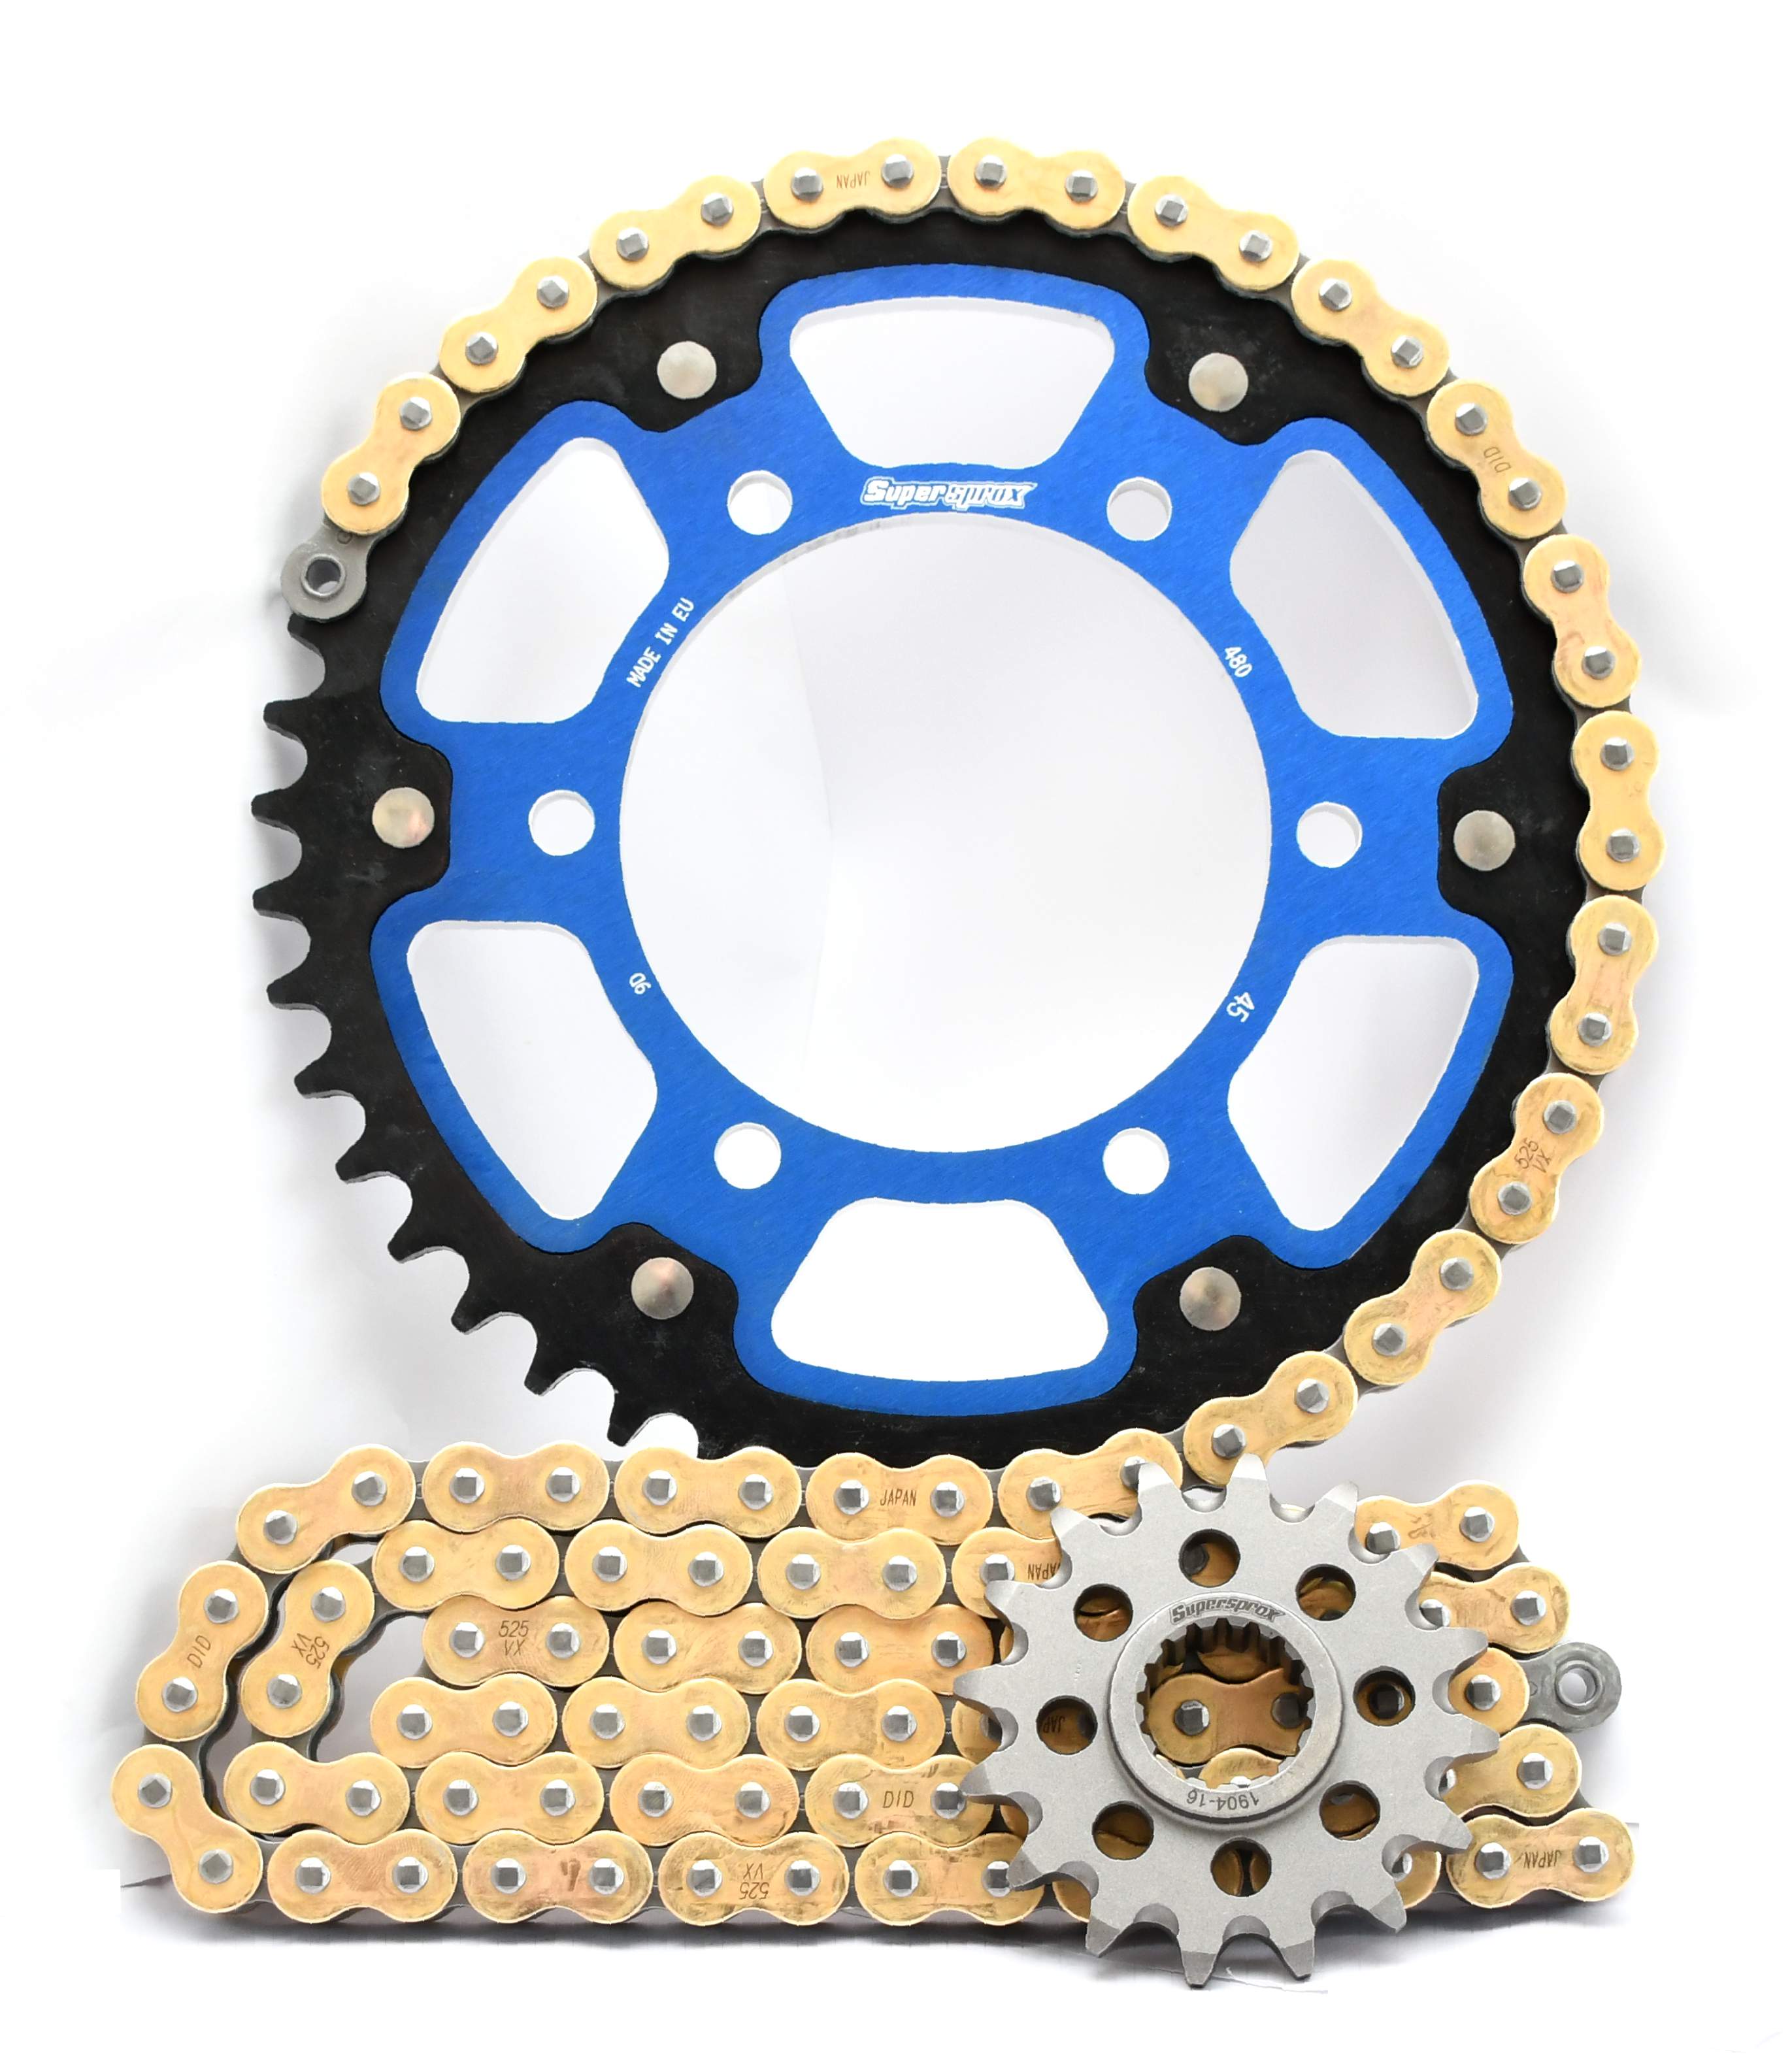 Supersprox Chain & Sprocket Kit for Yamaha MT-09 and XSR 900 - Standard Gearing - 0